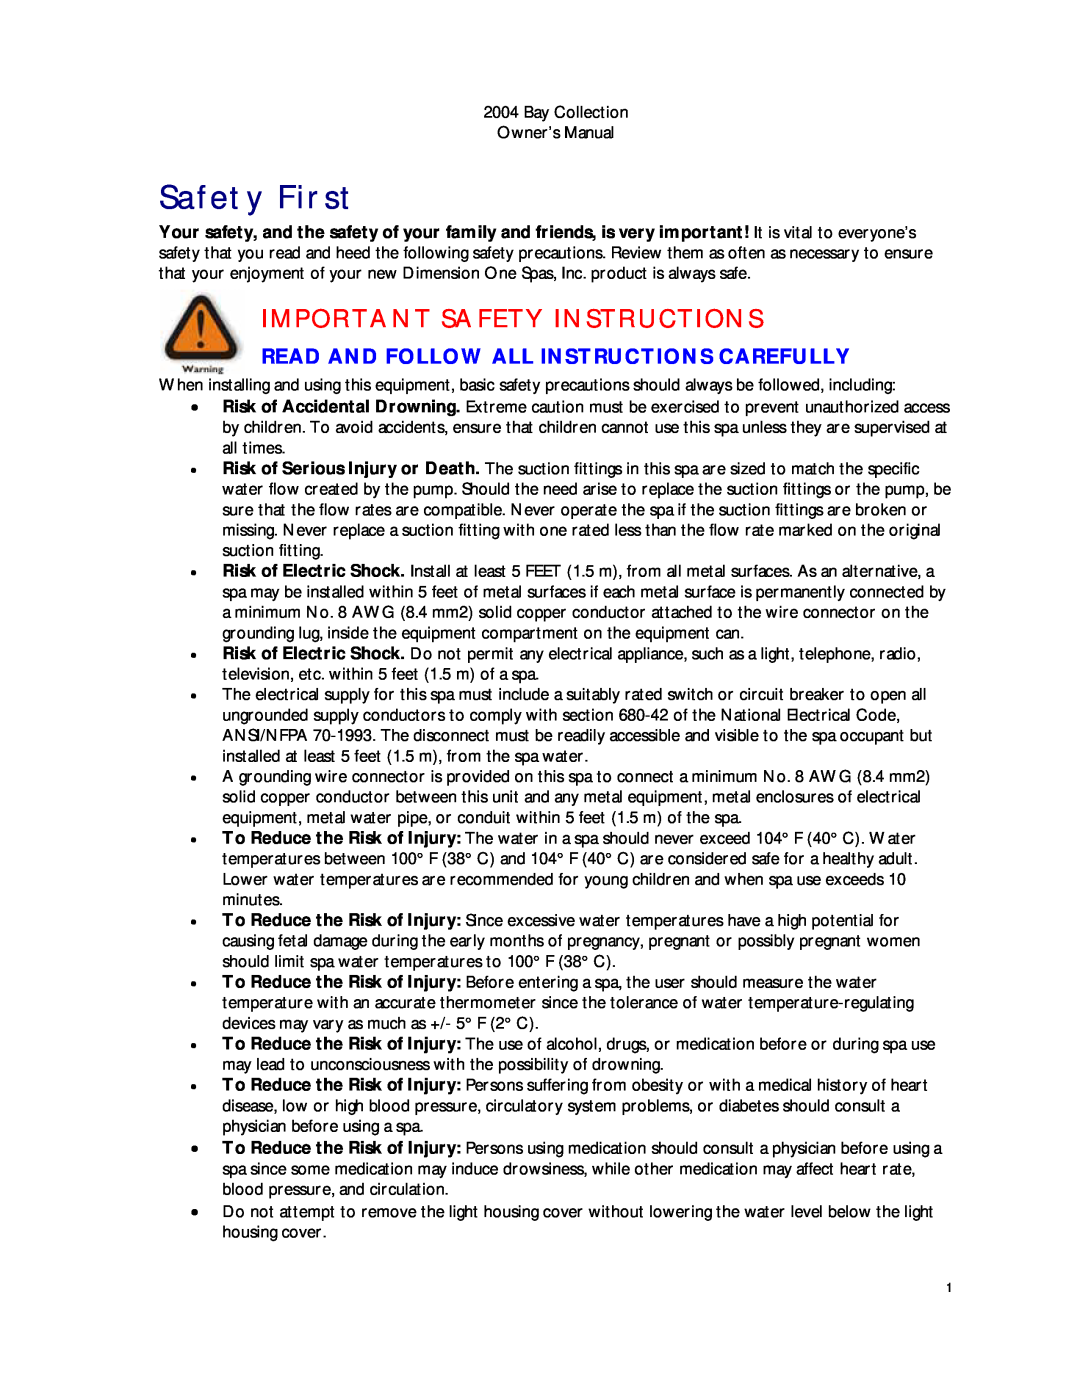 Dimension One Spas Bay Collection Safety First, Important Safety Instructions, Read And Follow All Instructions Carefully 